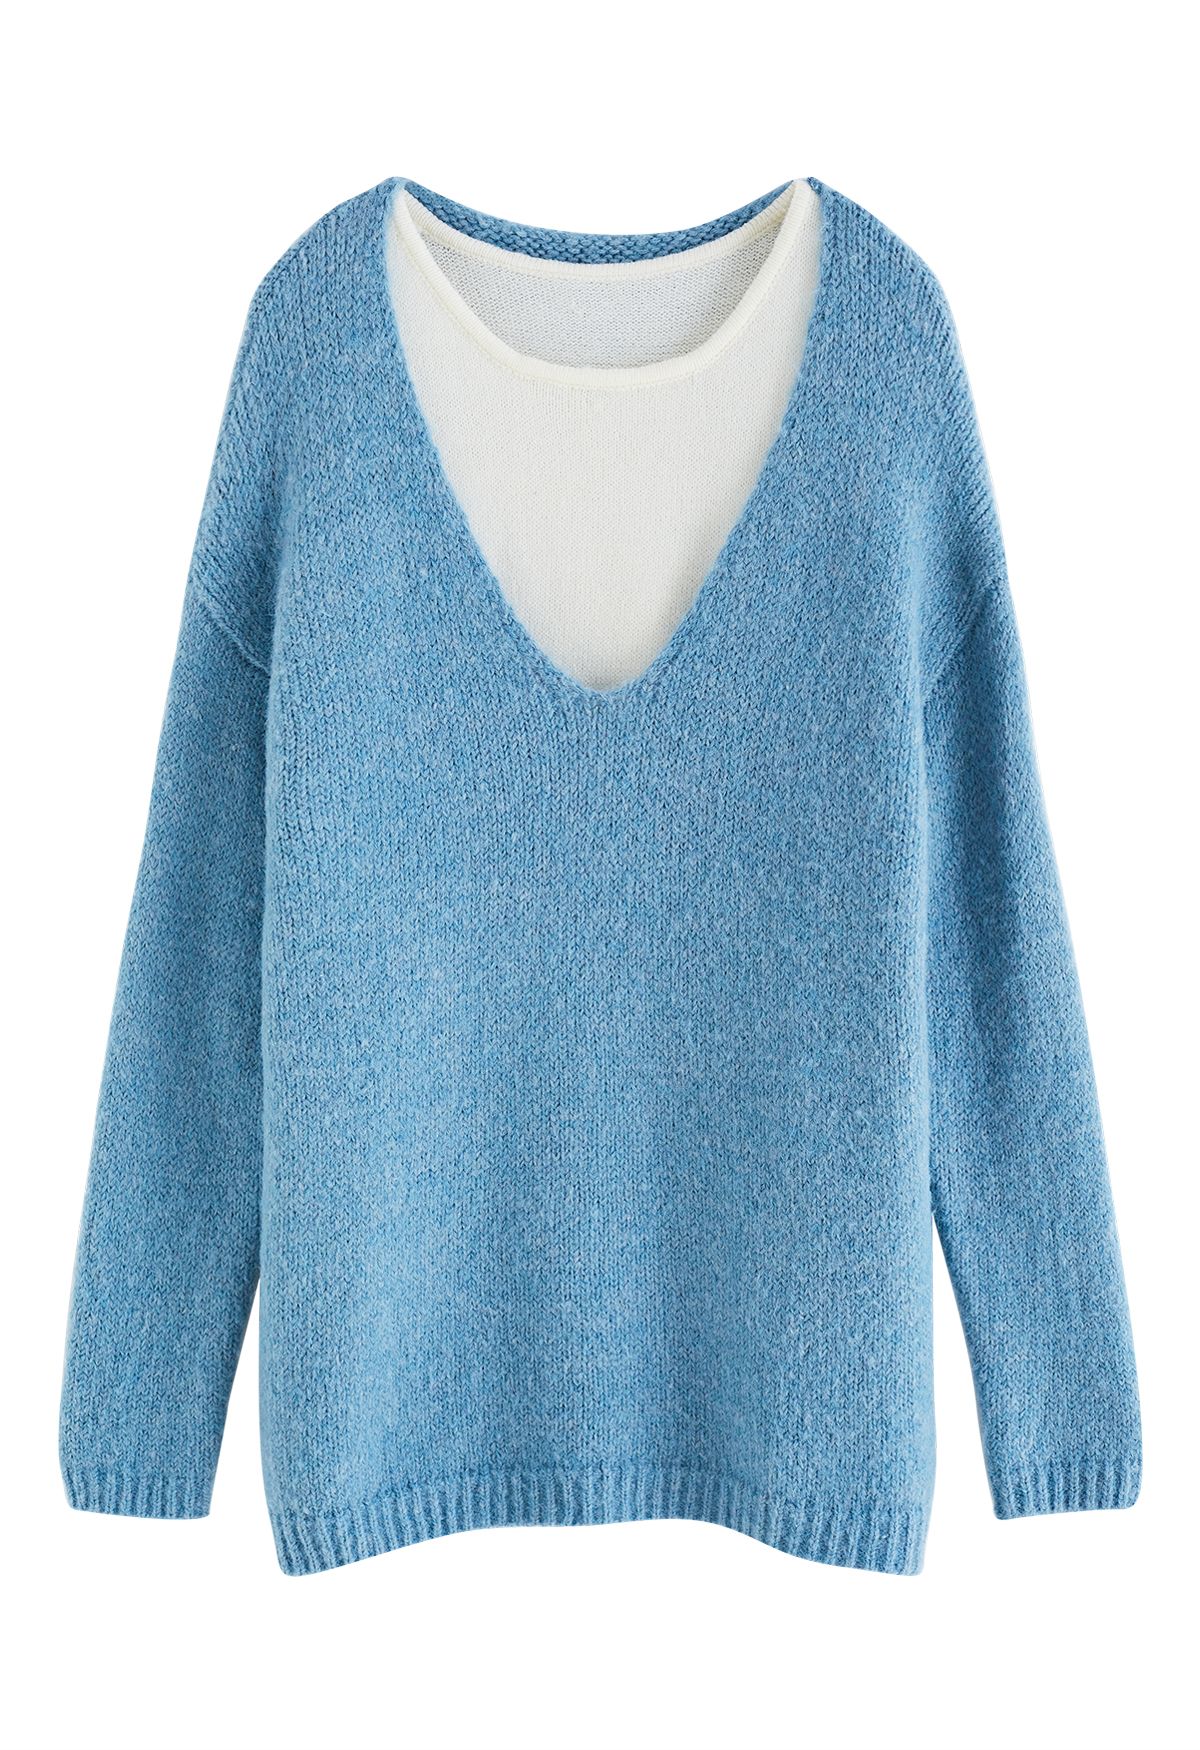 Breezy and Beautiful Blue V-Neck Knit Sweater Tank Top